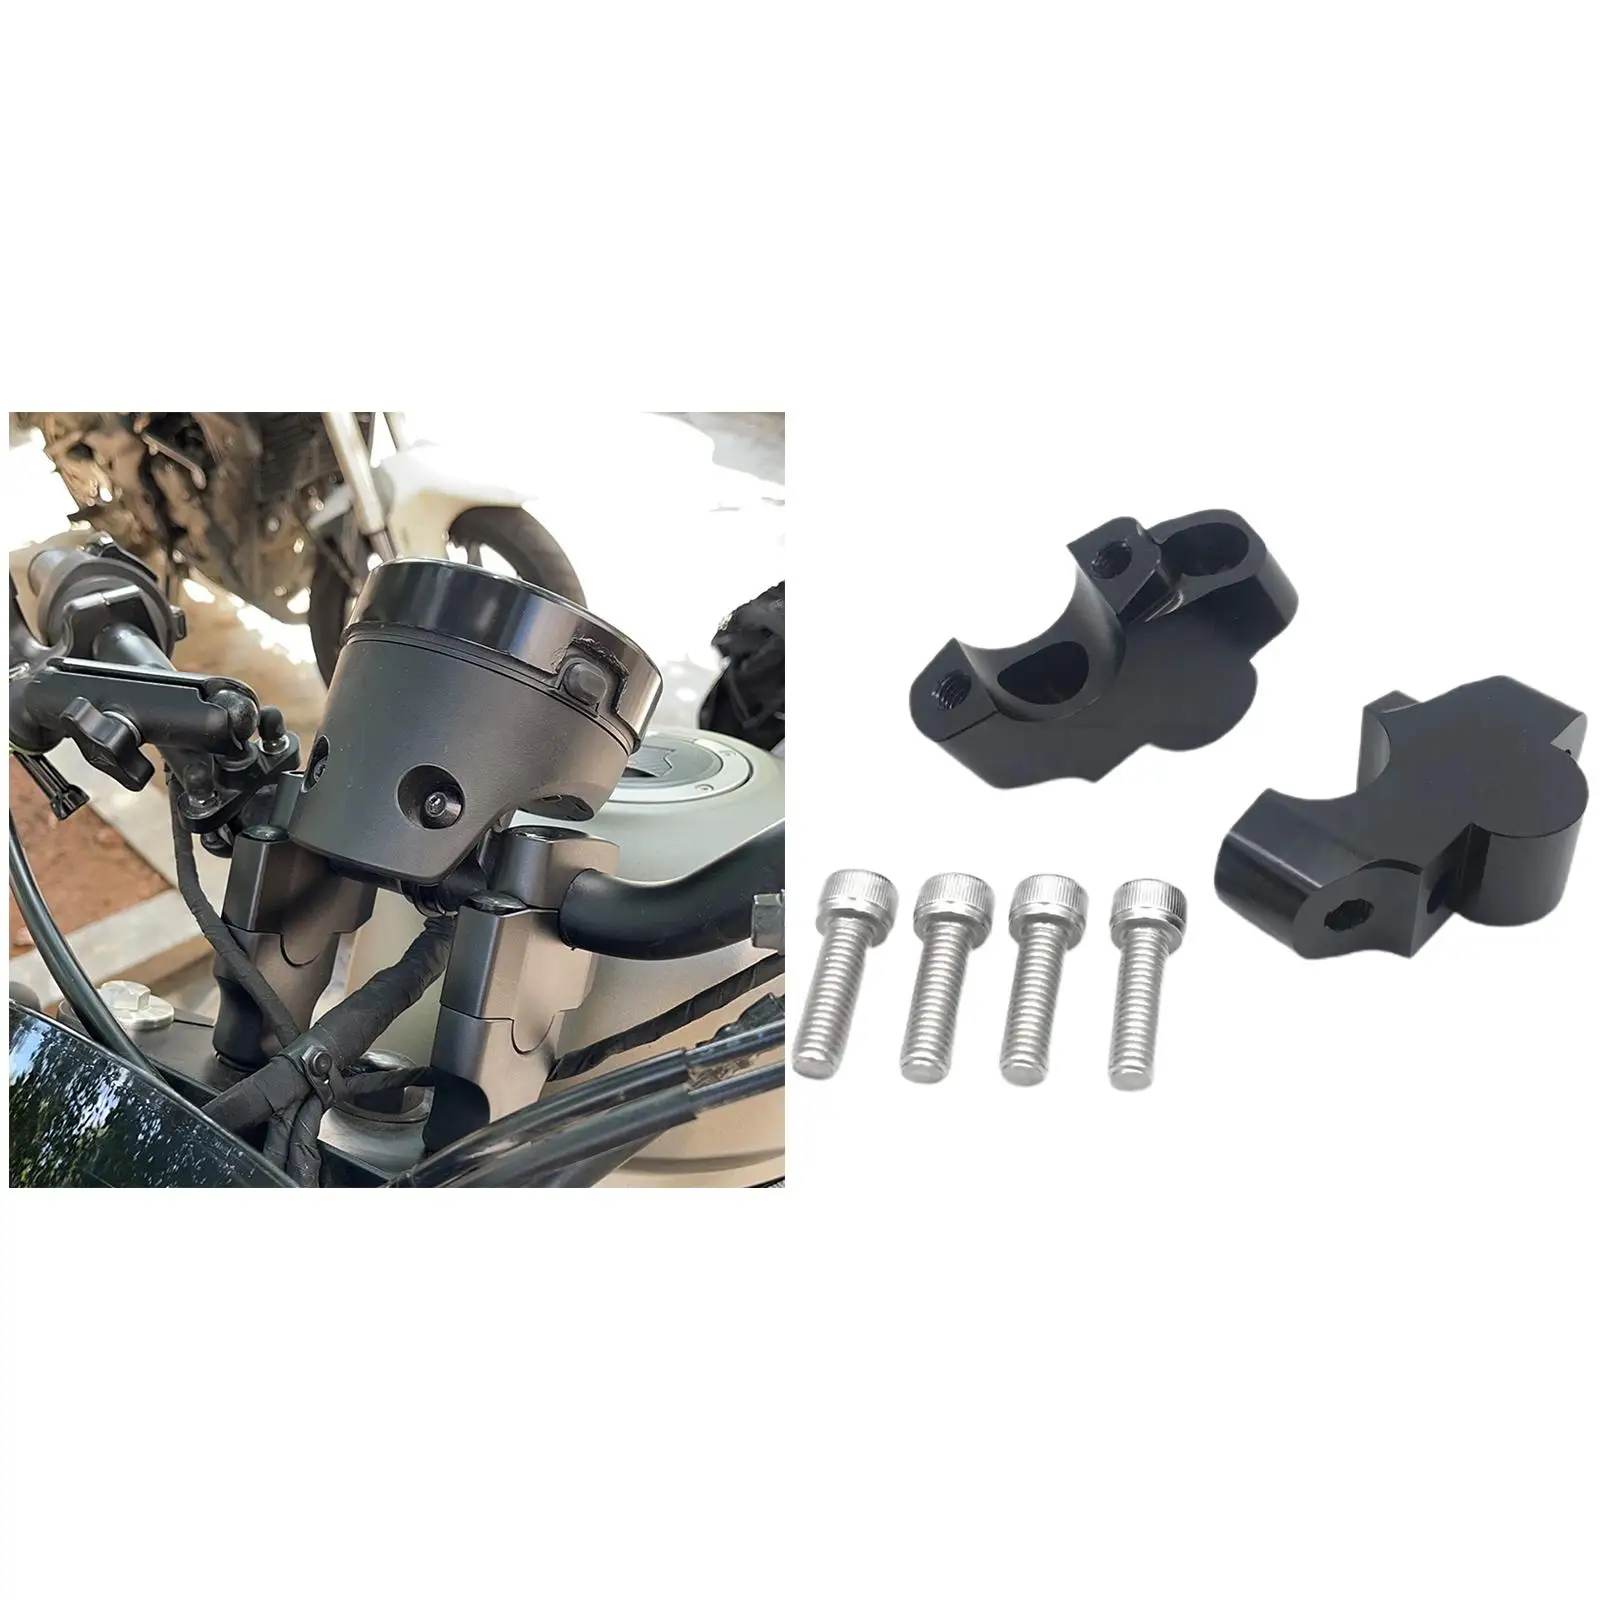 Ndlebar mount clamp easy to install replaces spare parts handle raise fits for cmx 1100 thumb200